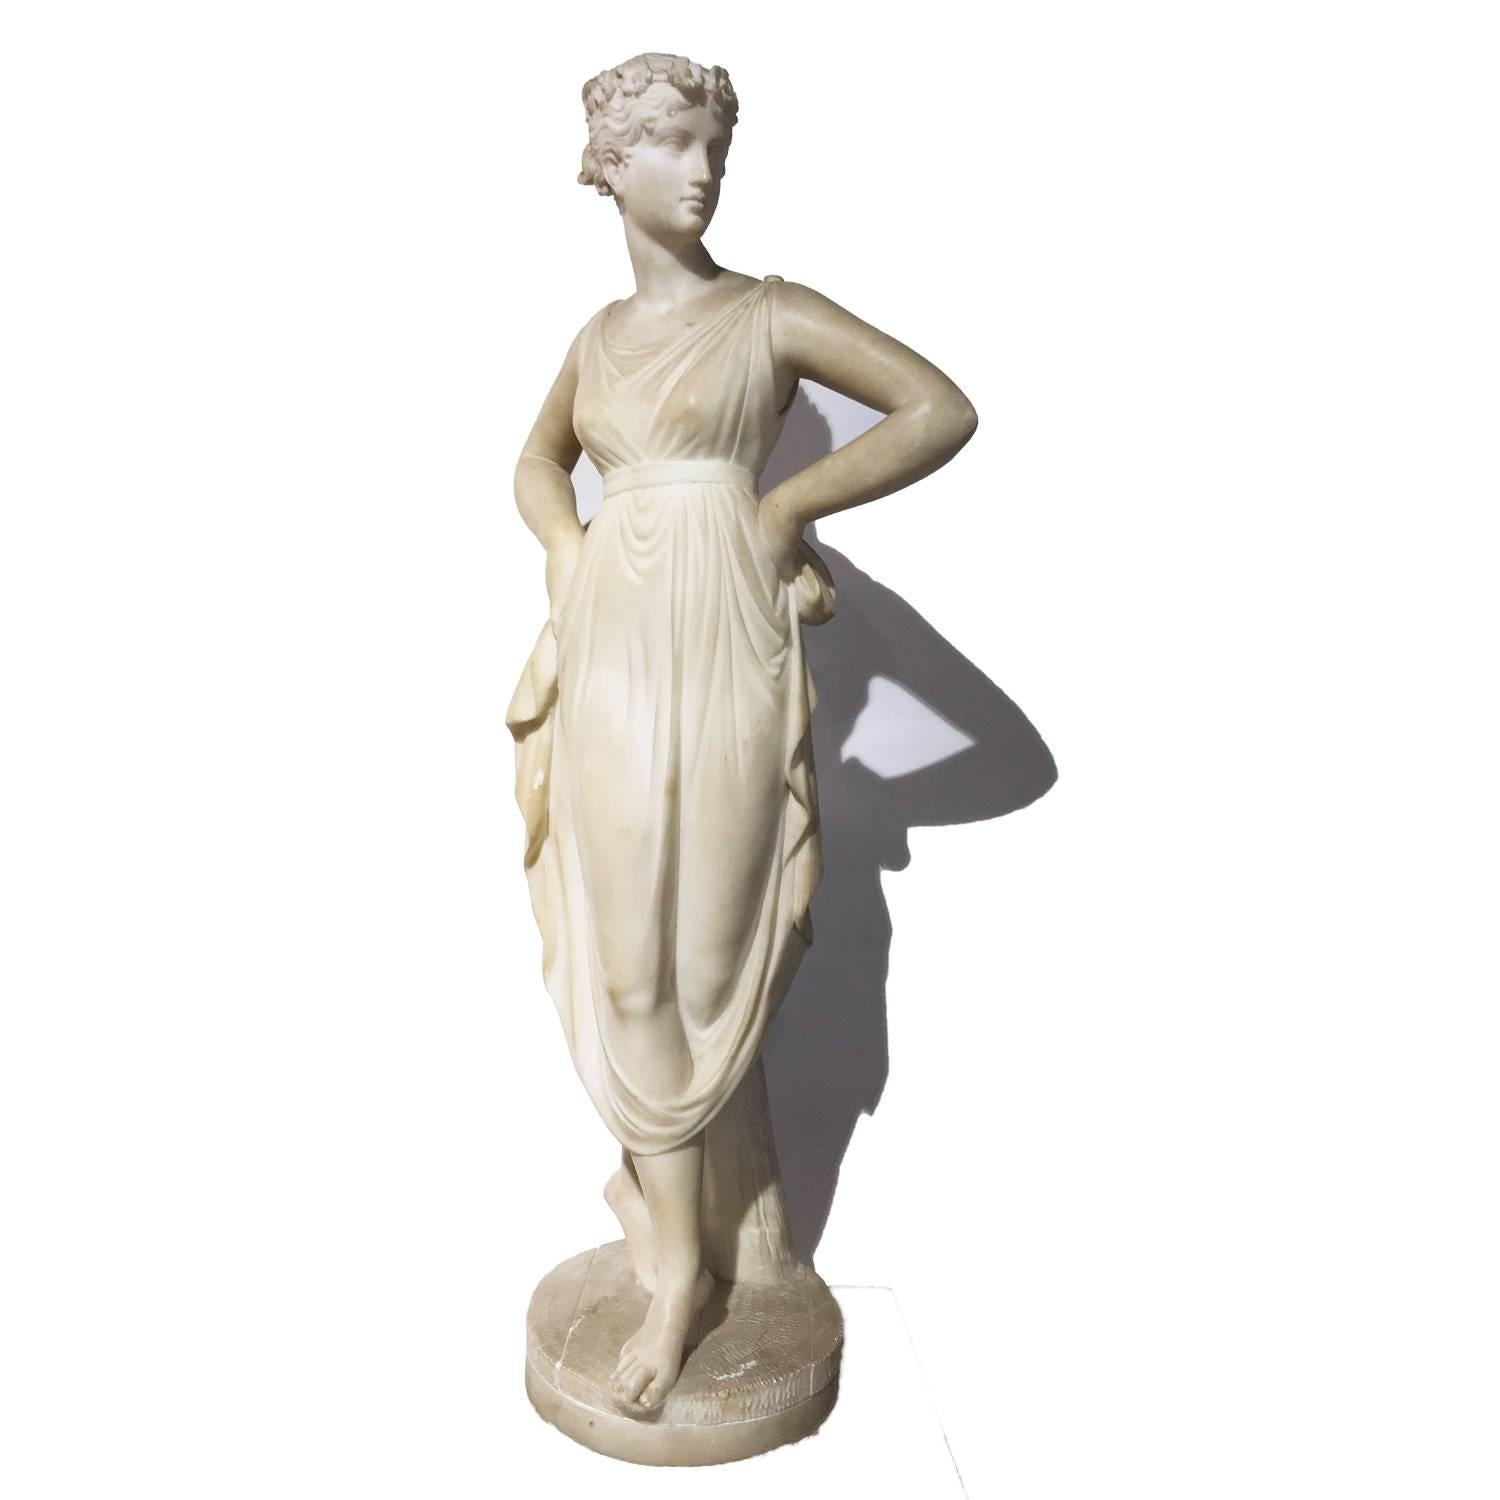 Antonio Canova was one of the most important Italian Neoclassical sculptor, famous for his marble sculptures. Often regarded as the greatest of the neoclassical artists, his artwork was inspired by the Baroque and the classical revival, but avoided